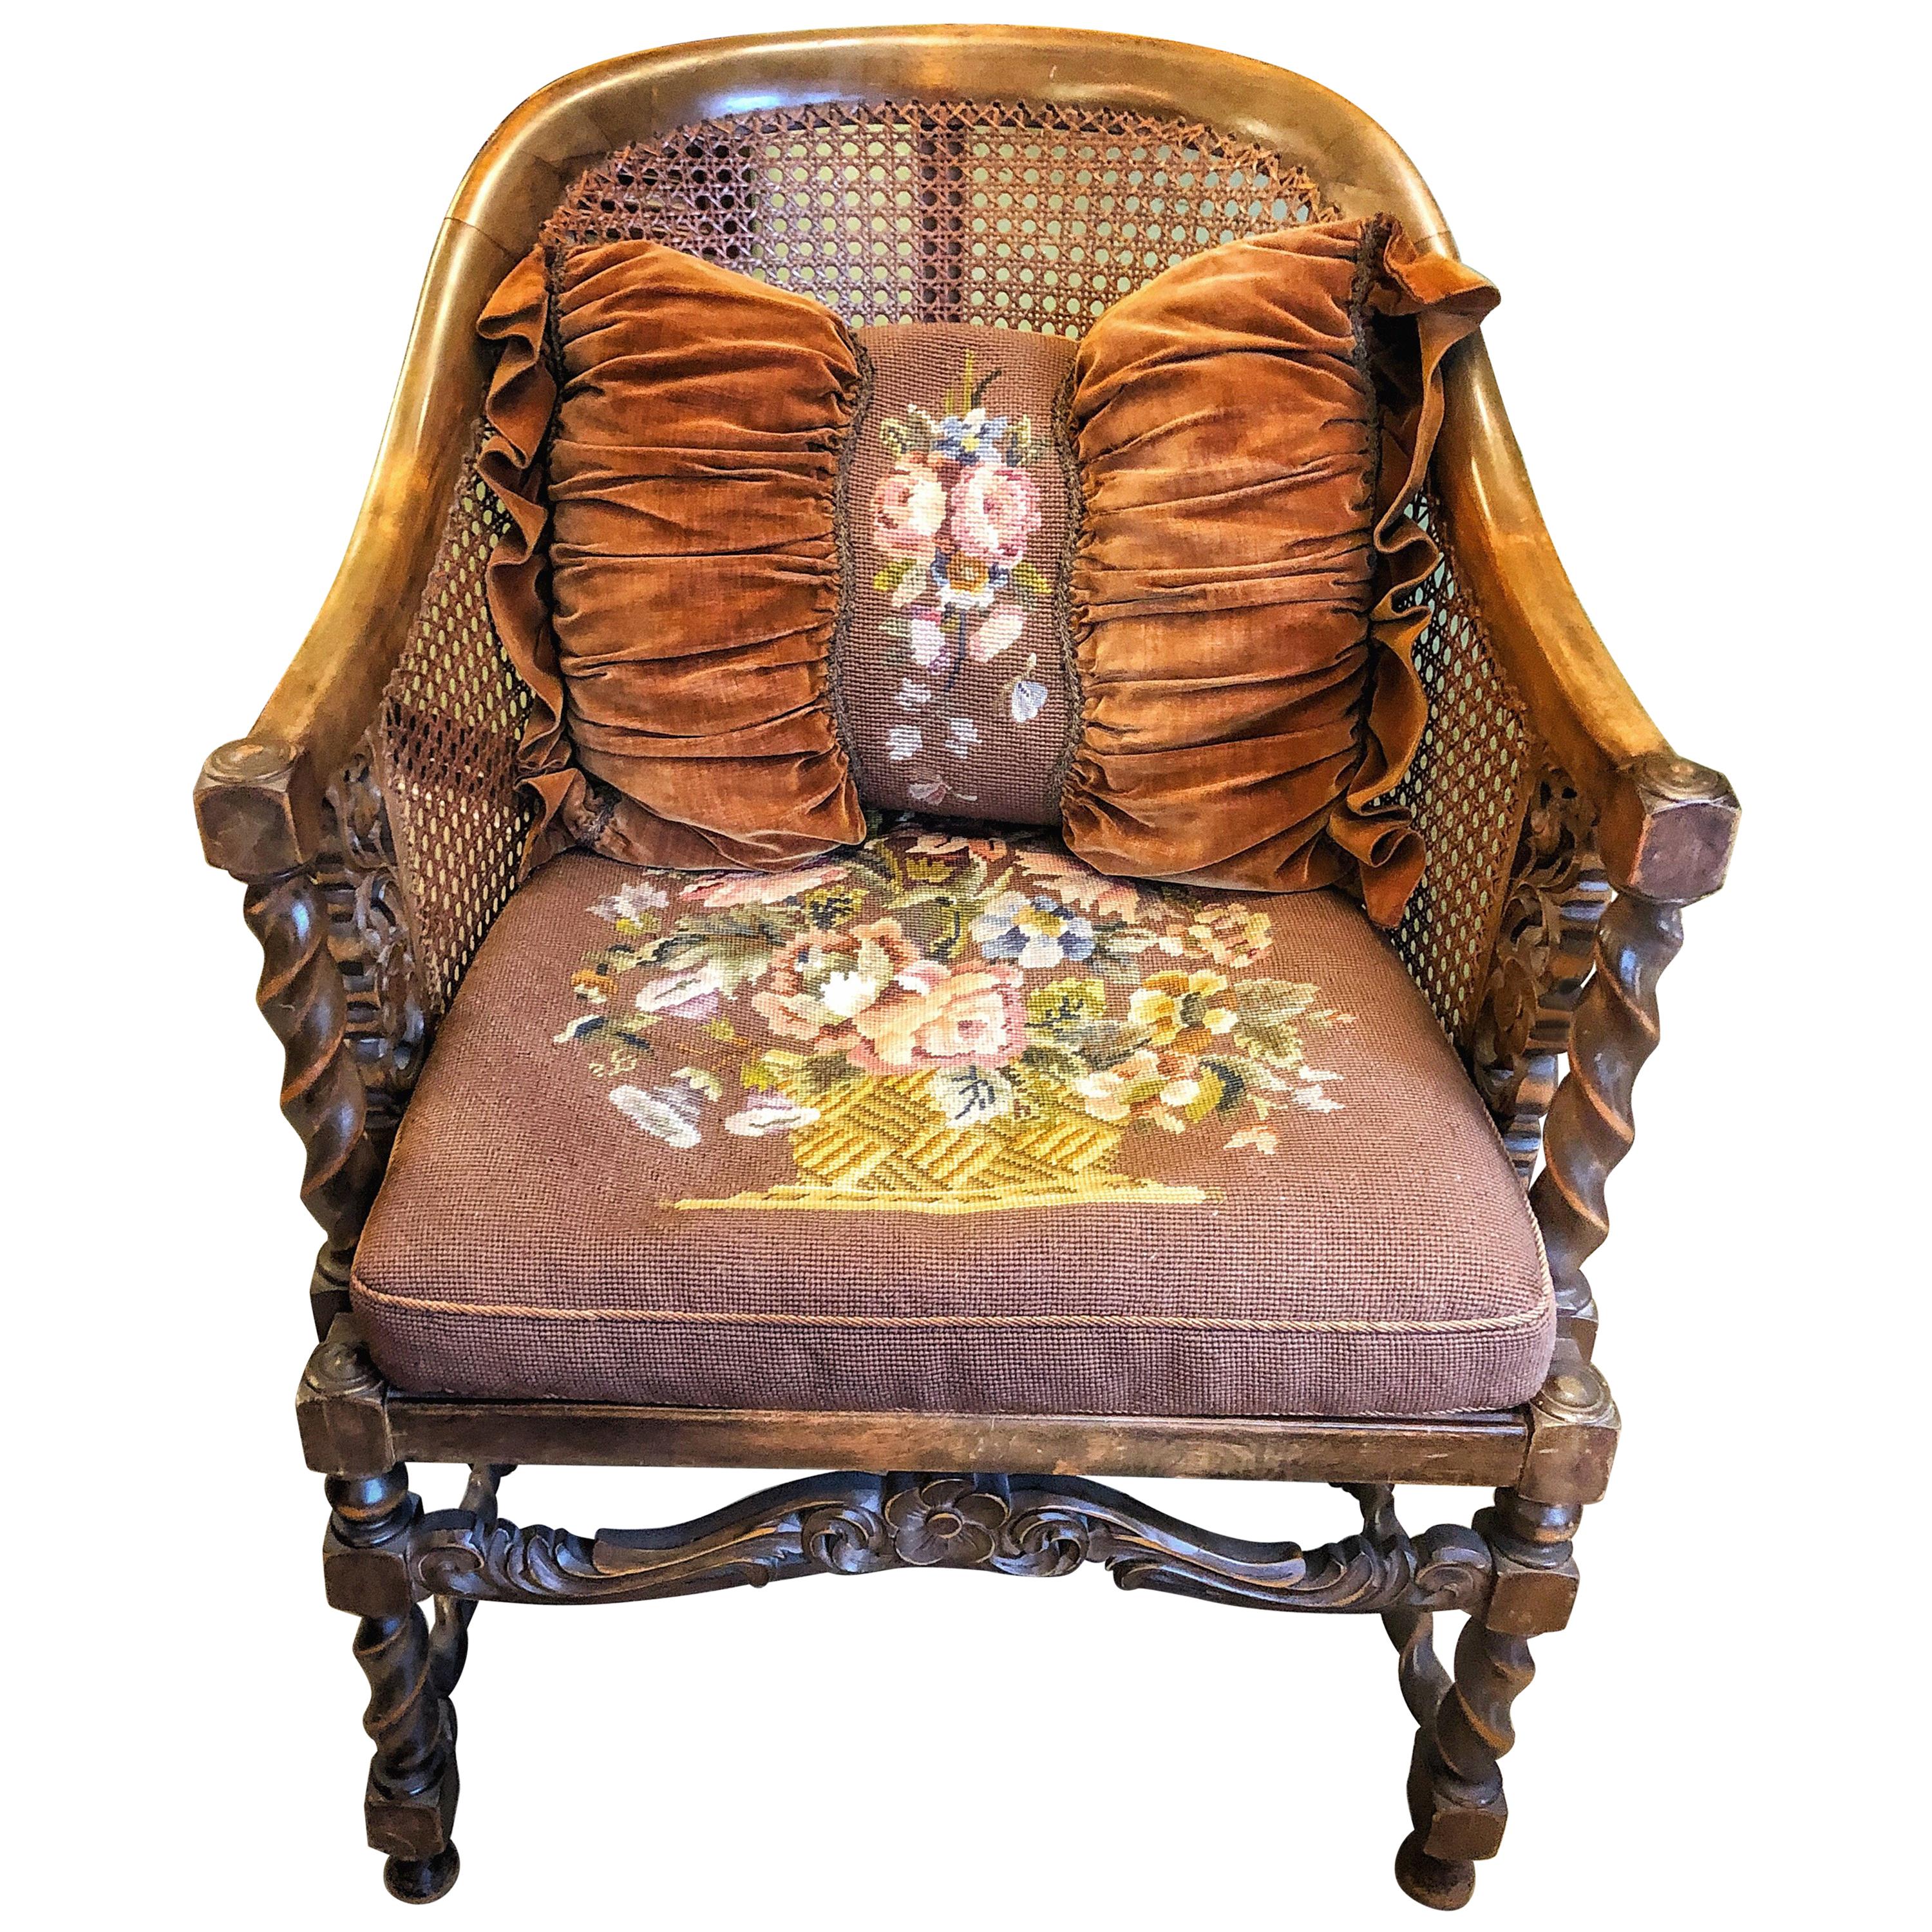 Cane Carved Wood French Armchair with Flower Tapestry, 19th Century